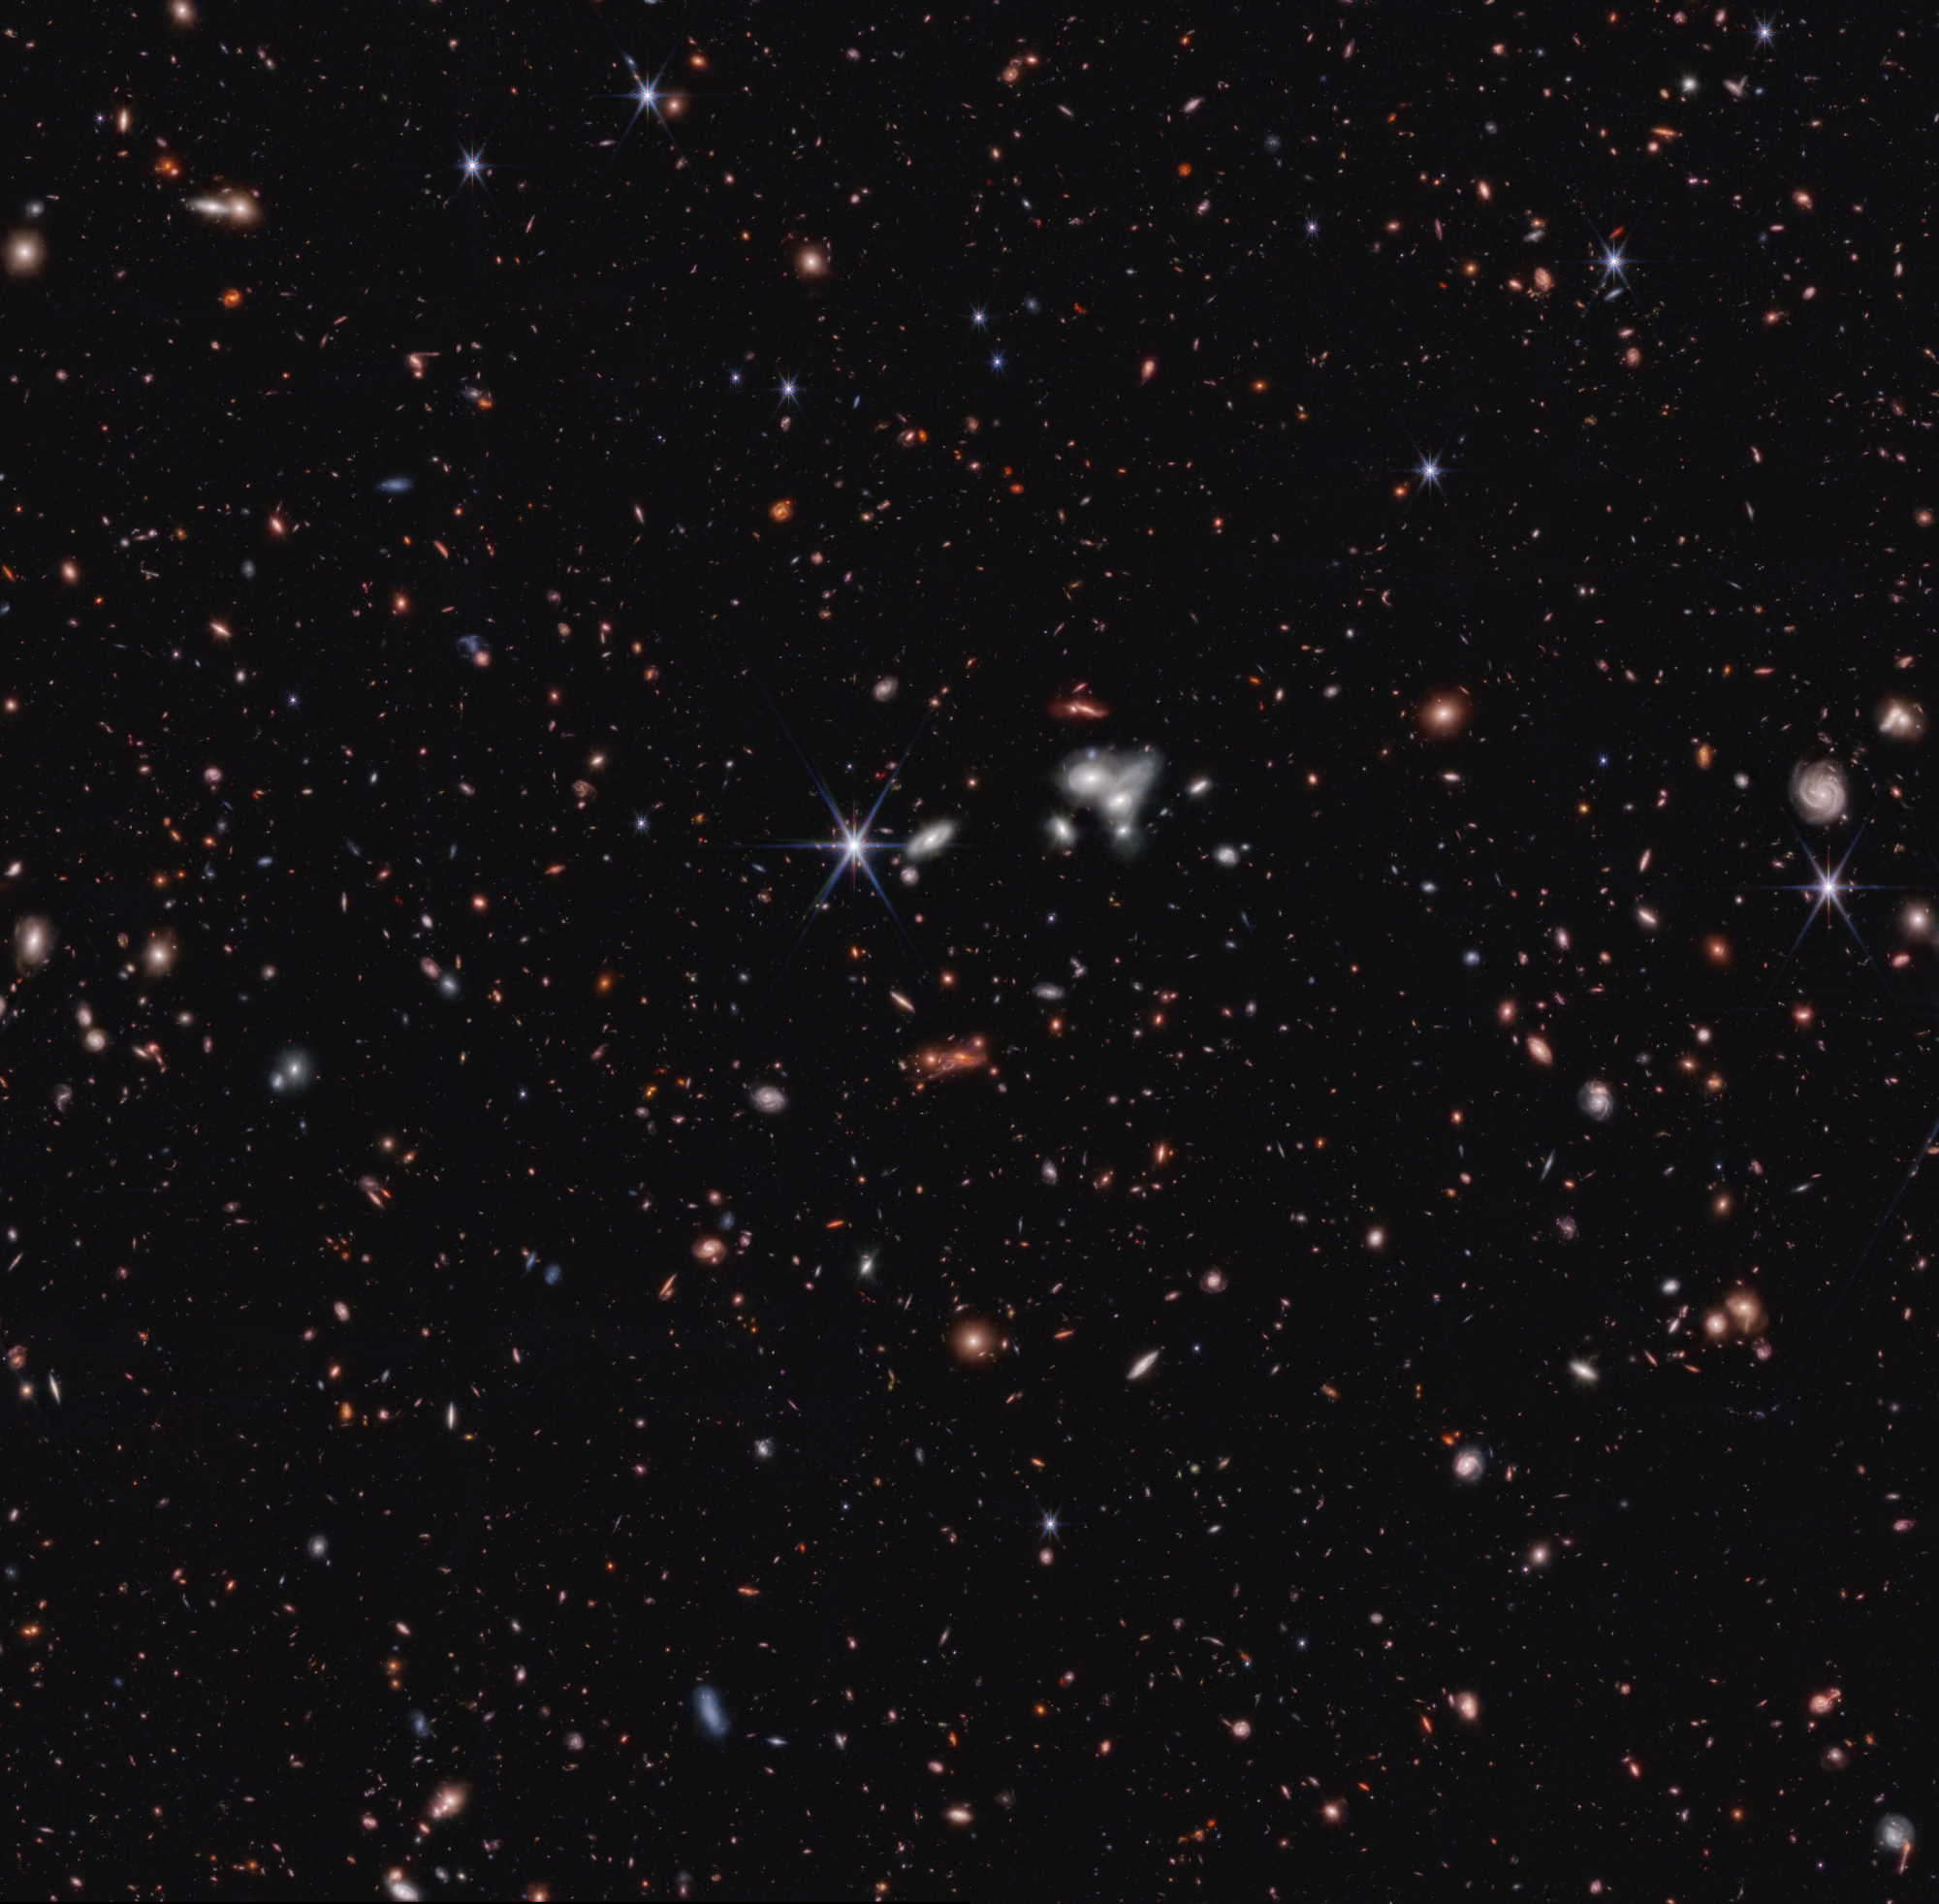 About 100,000 galaxies appear with many overlapping objects at various distances. They include large, blue foreground stars, some with all eight diffraction spikes, white and pink spiral and elliptical galaxies, and many tiny red dots throughout.